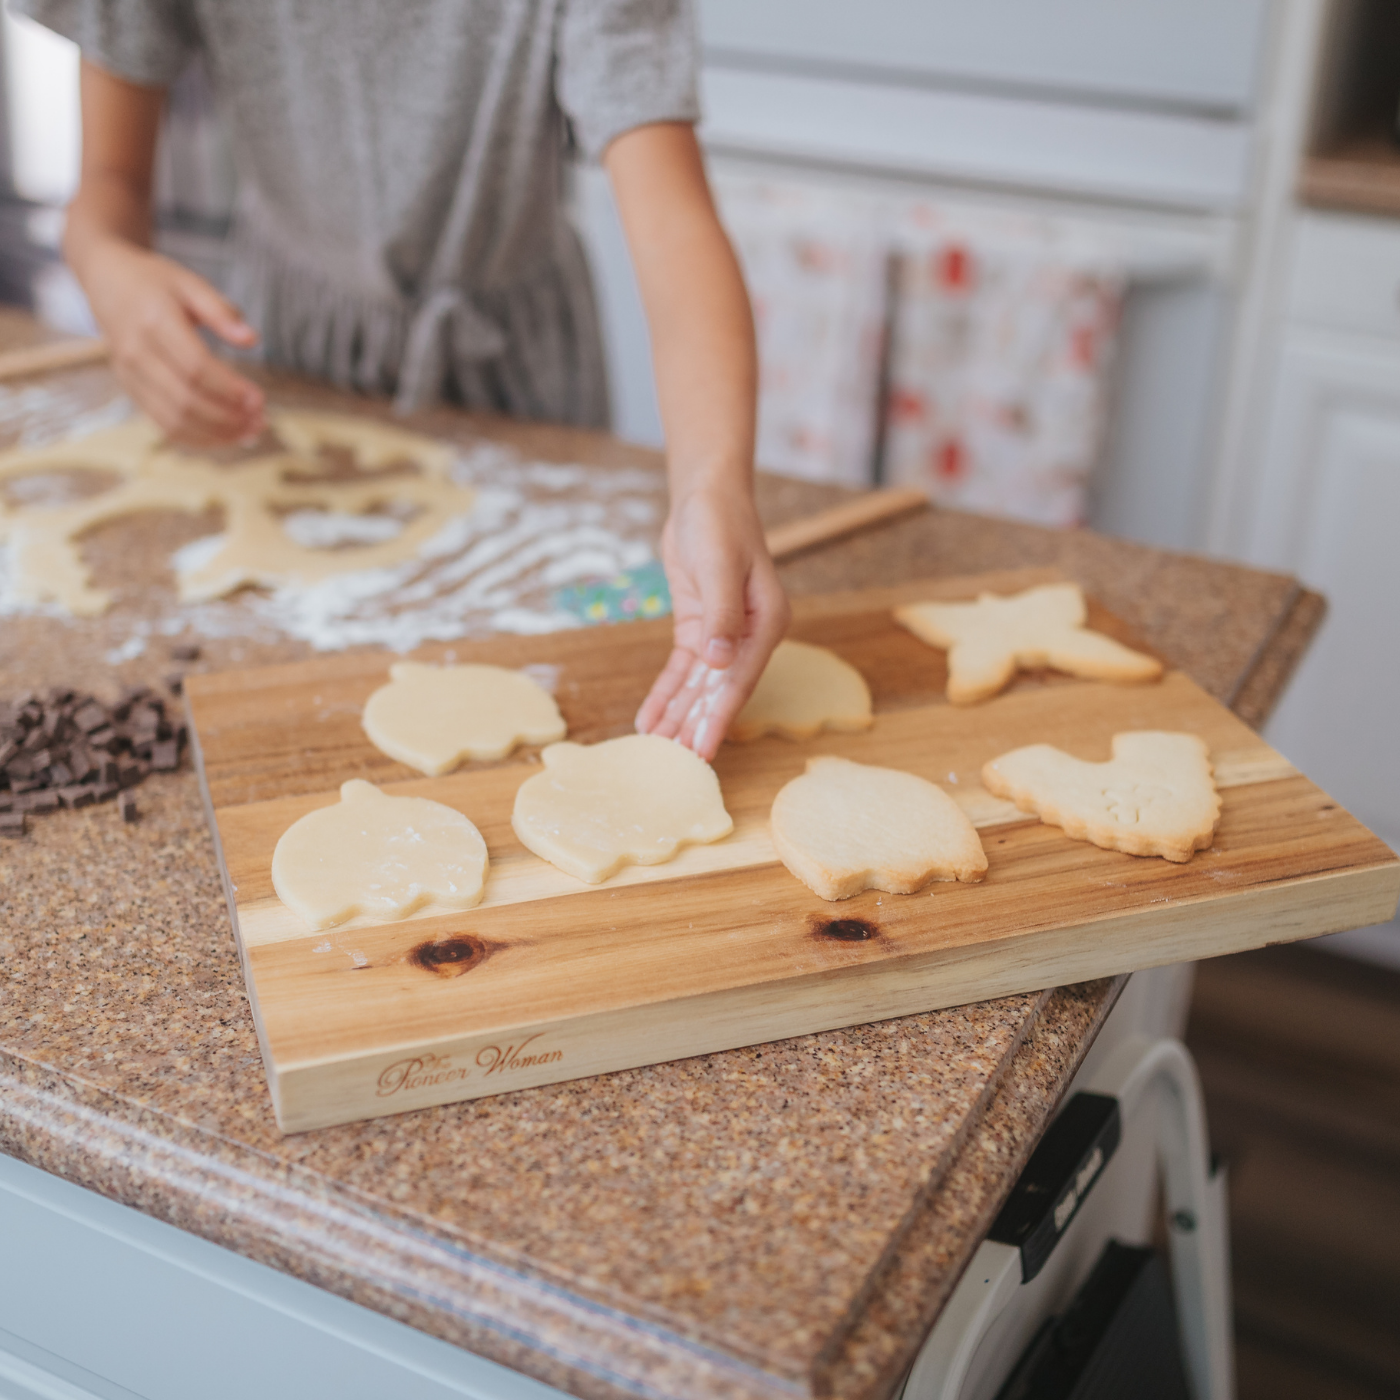 Lifestyle image of a person using the tulip cookie cutter to cut out cookies